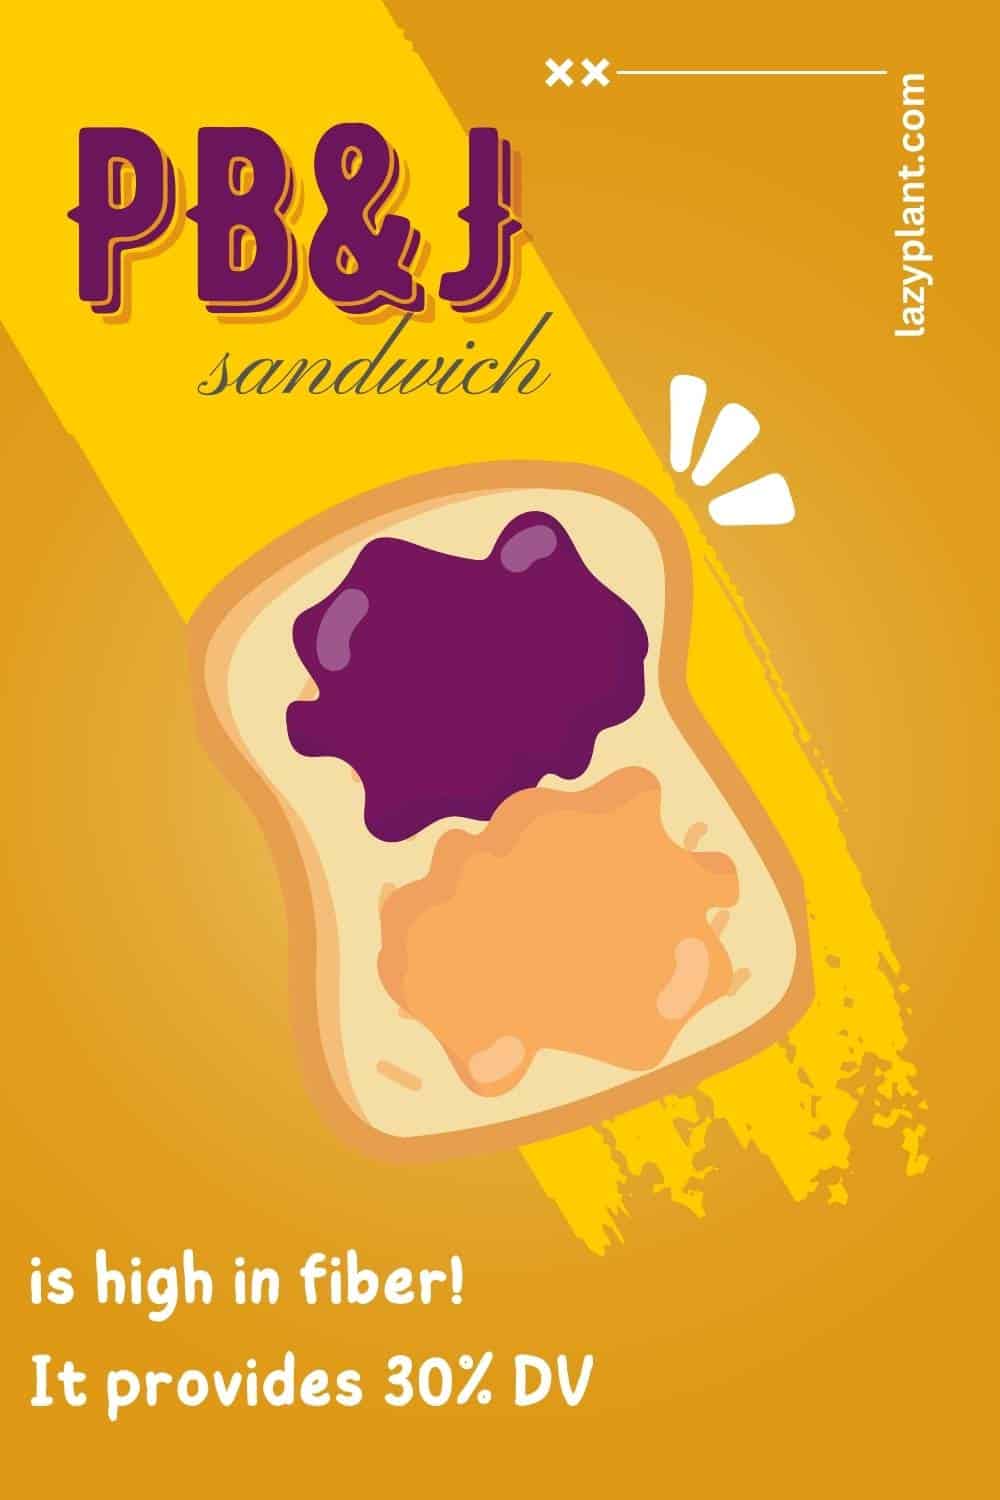 A peanut butter & jelly sandwich a day can skyrocket our fiber intake!